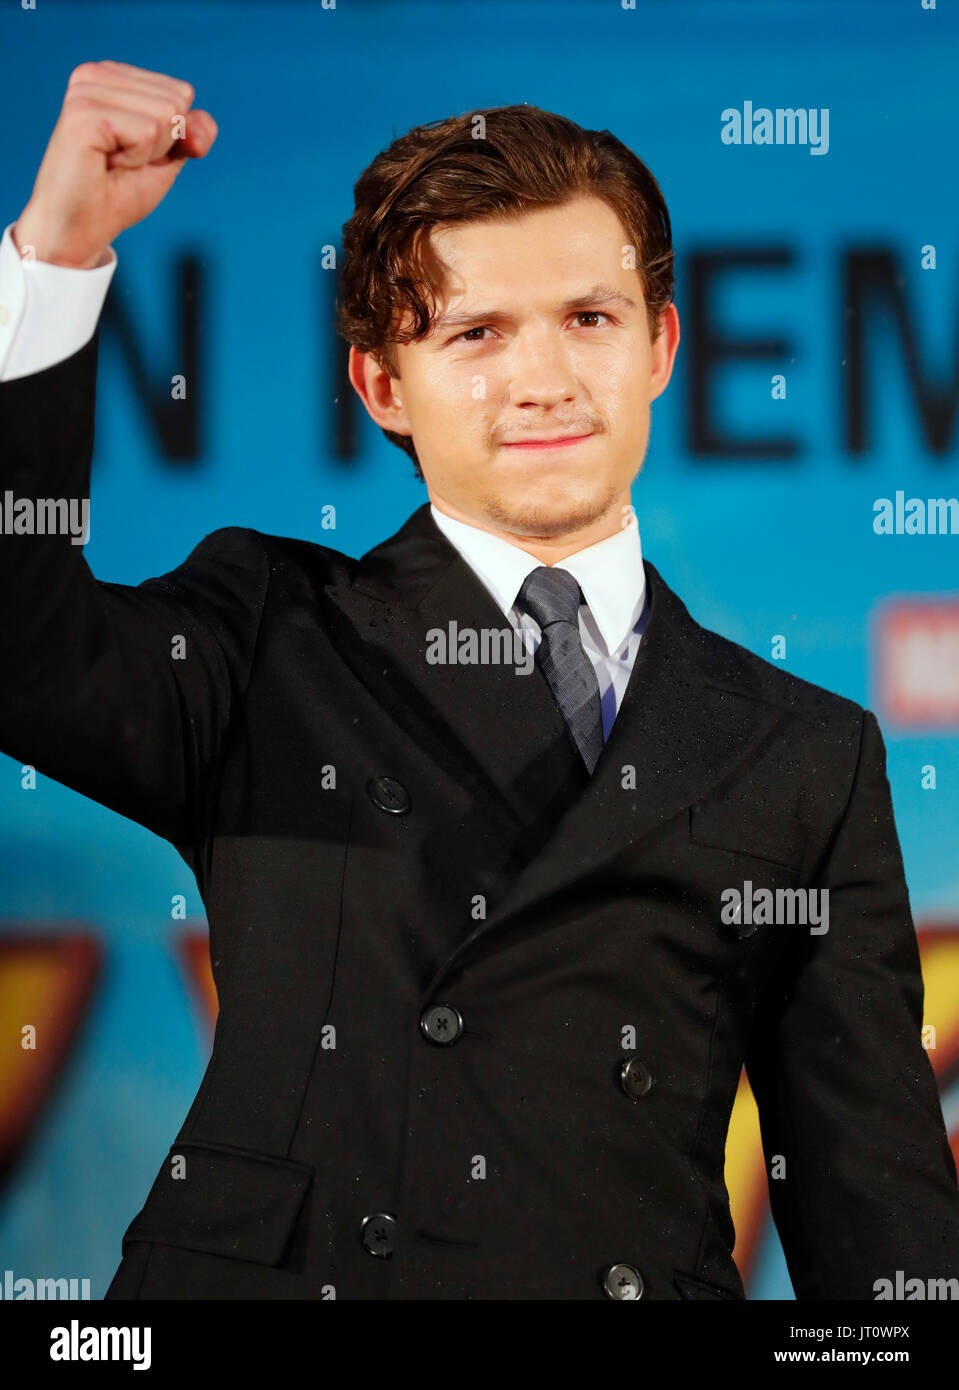 British actor Tom Holland and American director John Watts attended the premiere for their film Spider-Man: Homecoming on August 7, 2017 in Shinjuku, Tokyo, Japan. Many fans gathered at the event in the summer heat to welcome the stars who are in Japan for the first time. The Marvel film opens in Japanese theaters on August 11. Stock Photo